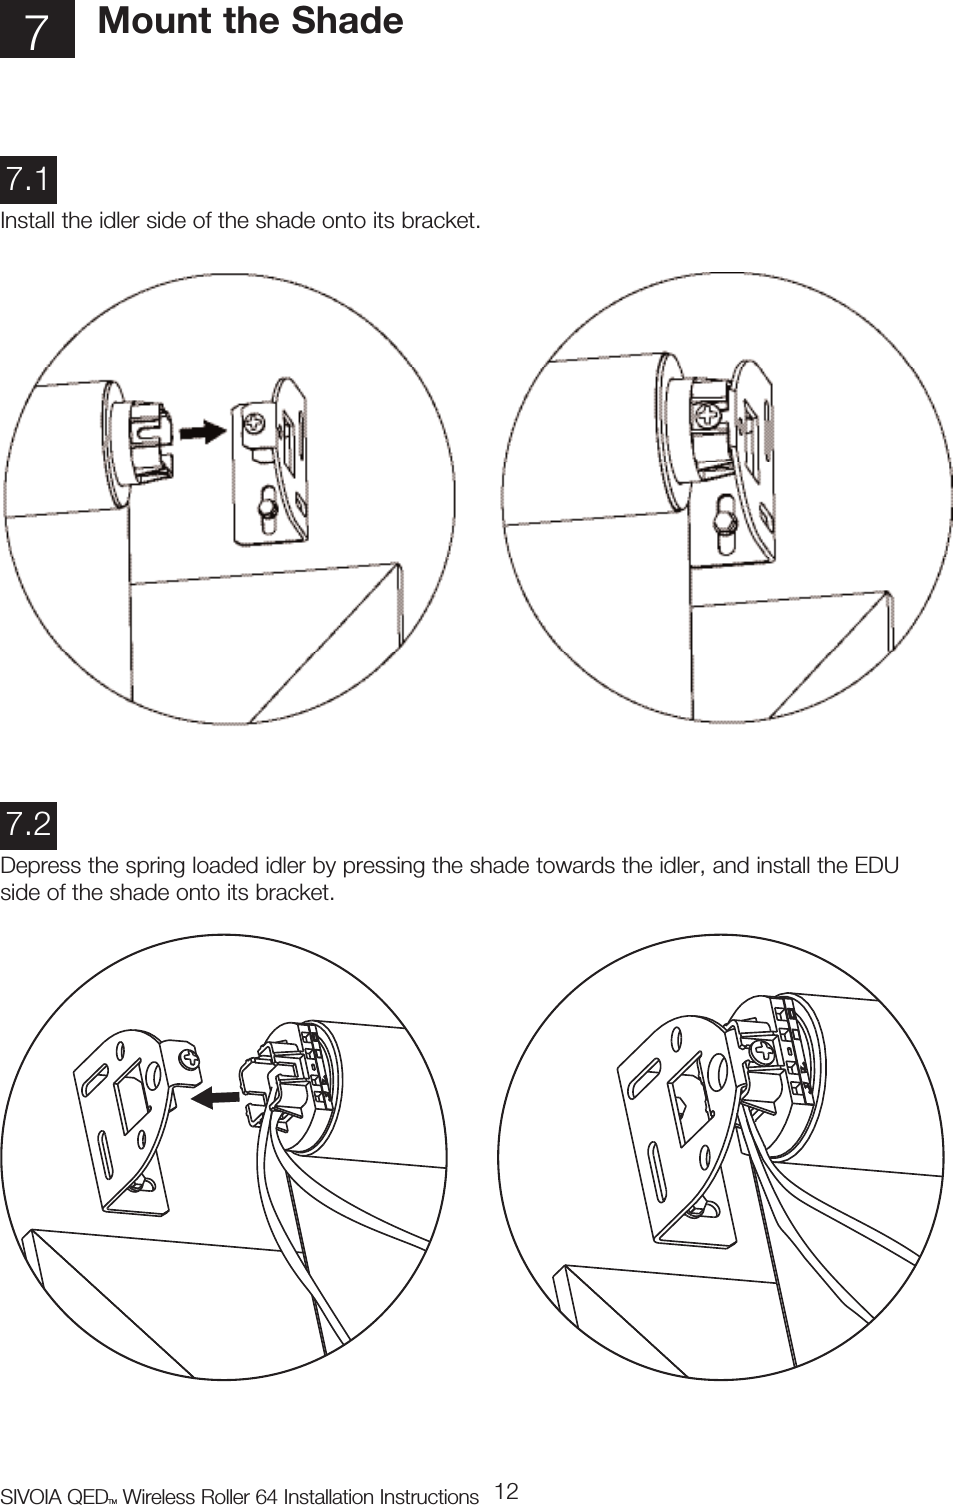 SIVOIA QEDTM Wireless Roller 64 Installation Instructions 127Mount the ShadeInstall the idler side of the shade onto its bracket.7.1Depress the spring loaded idler by pressing the shade towards the idler, and install the EDUside of the shade onto its bracket.7.2